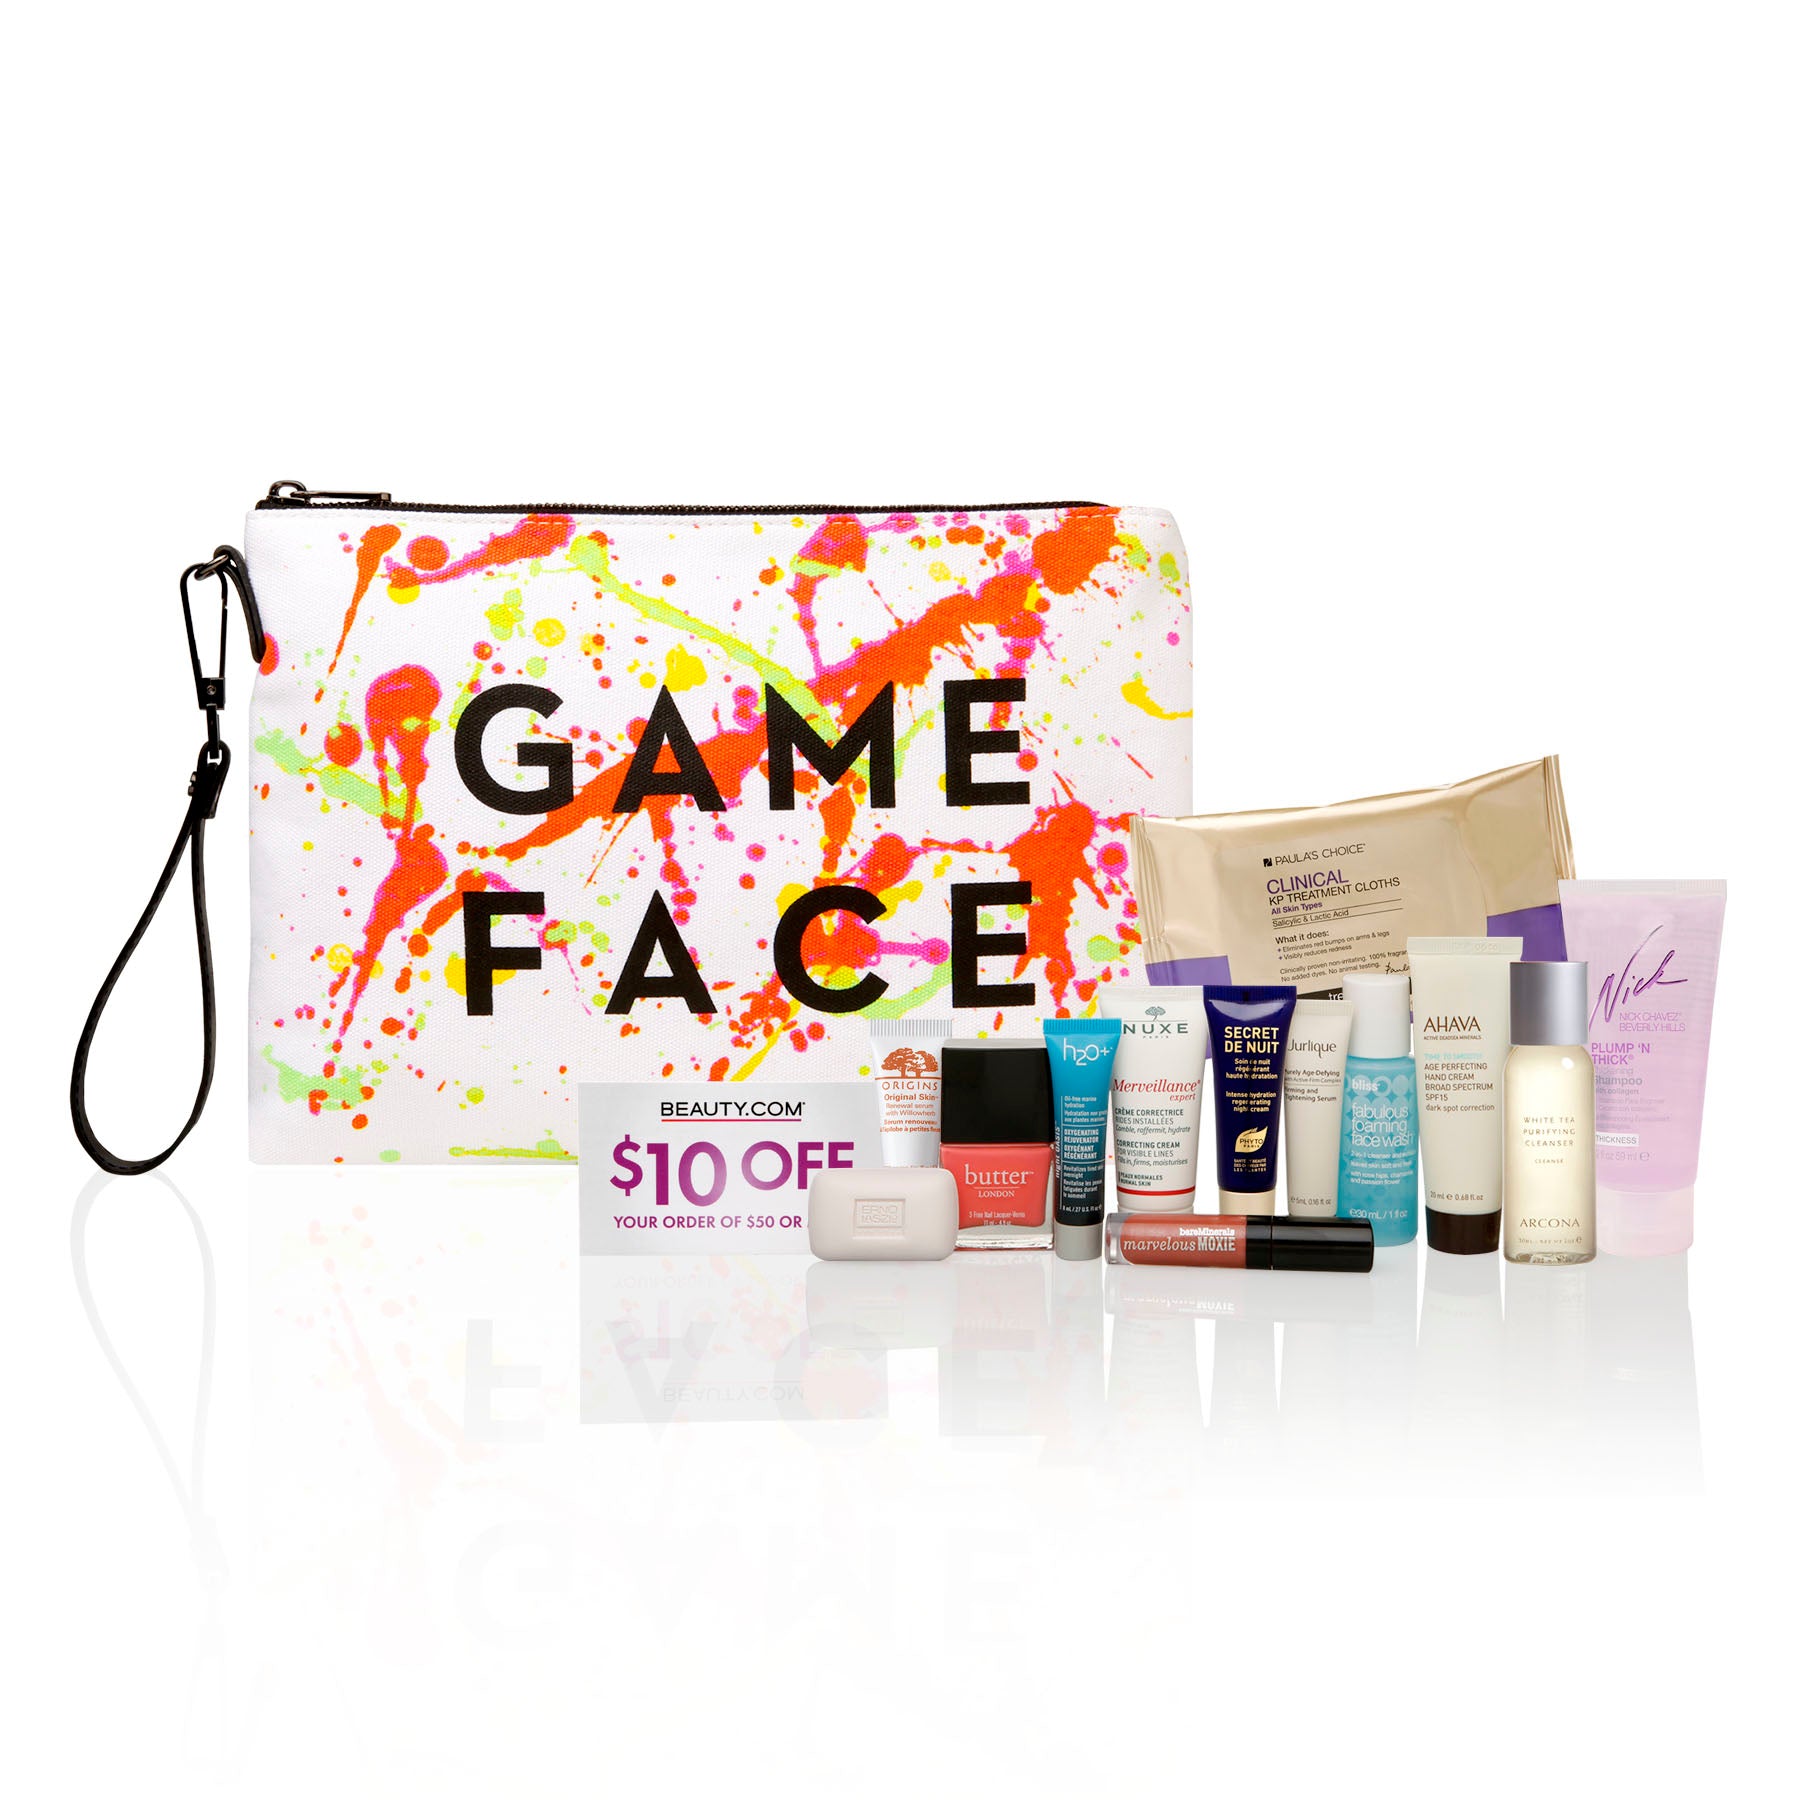 GWP, Preview, Photos, Beauty.com, MILLY, Free, Bag, With, Purchase, Filled, With, Makeup, Skincare, Samples